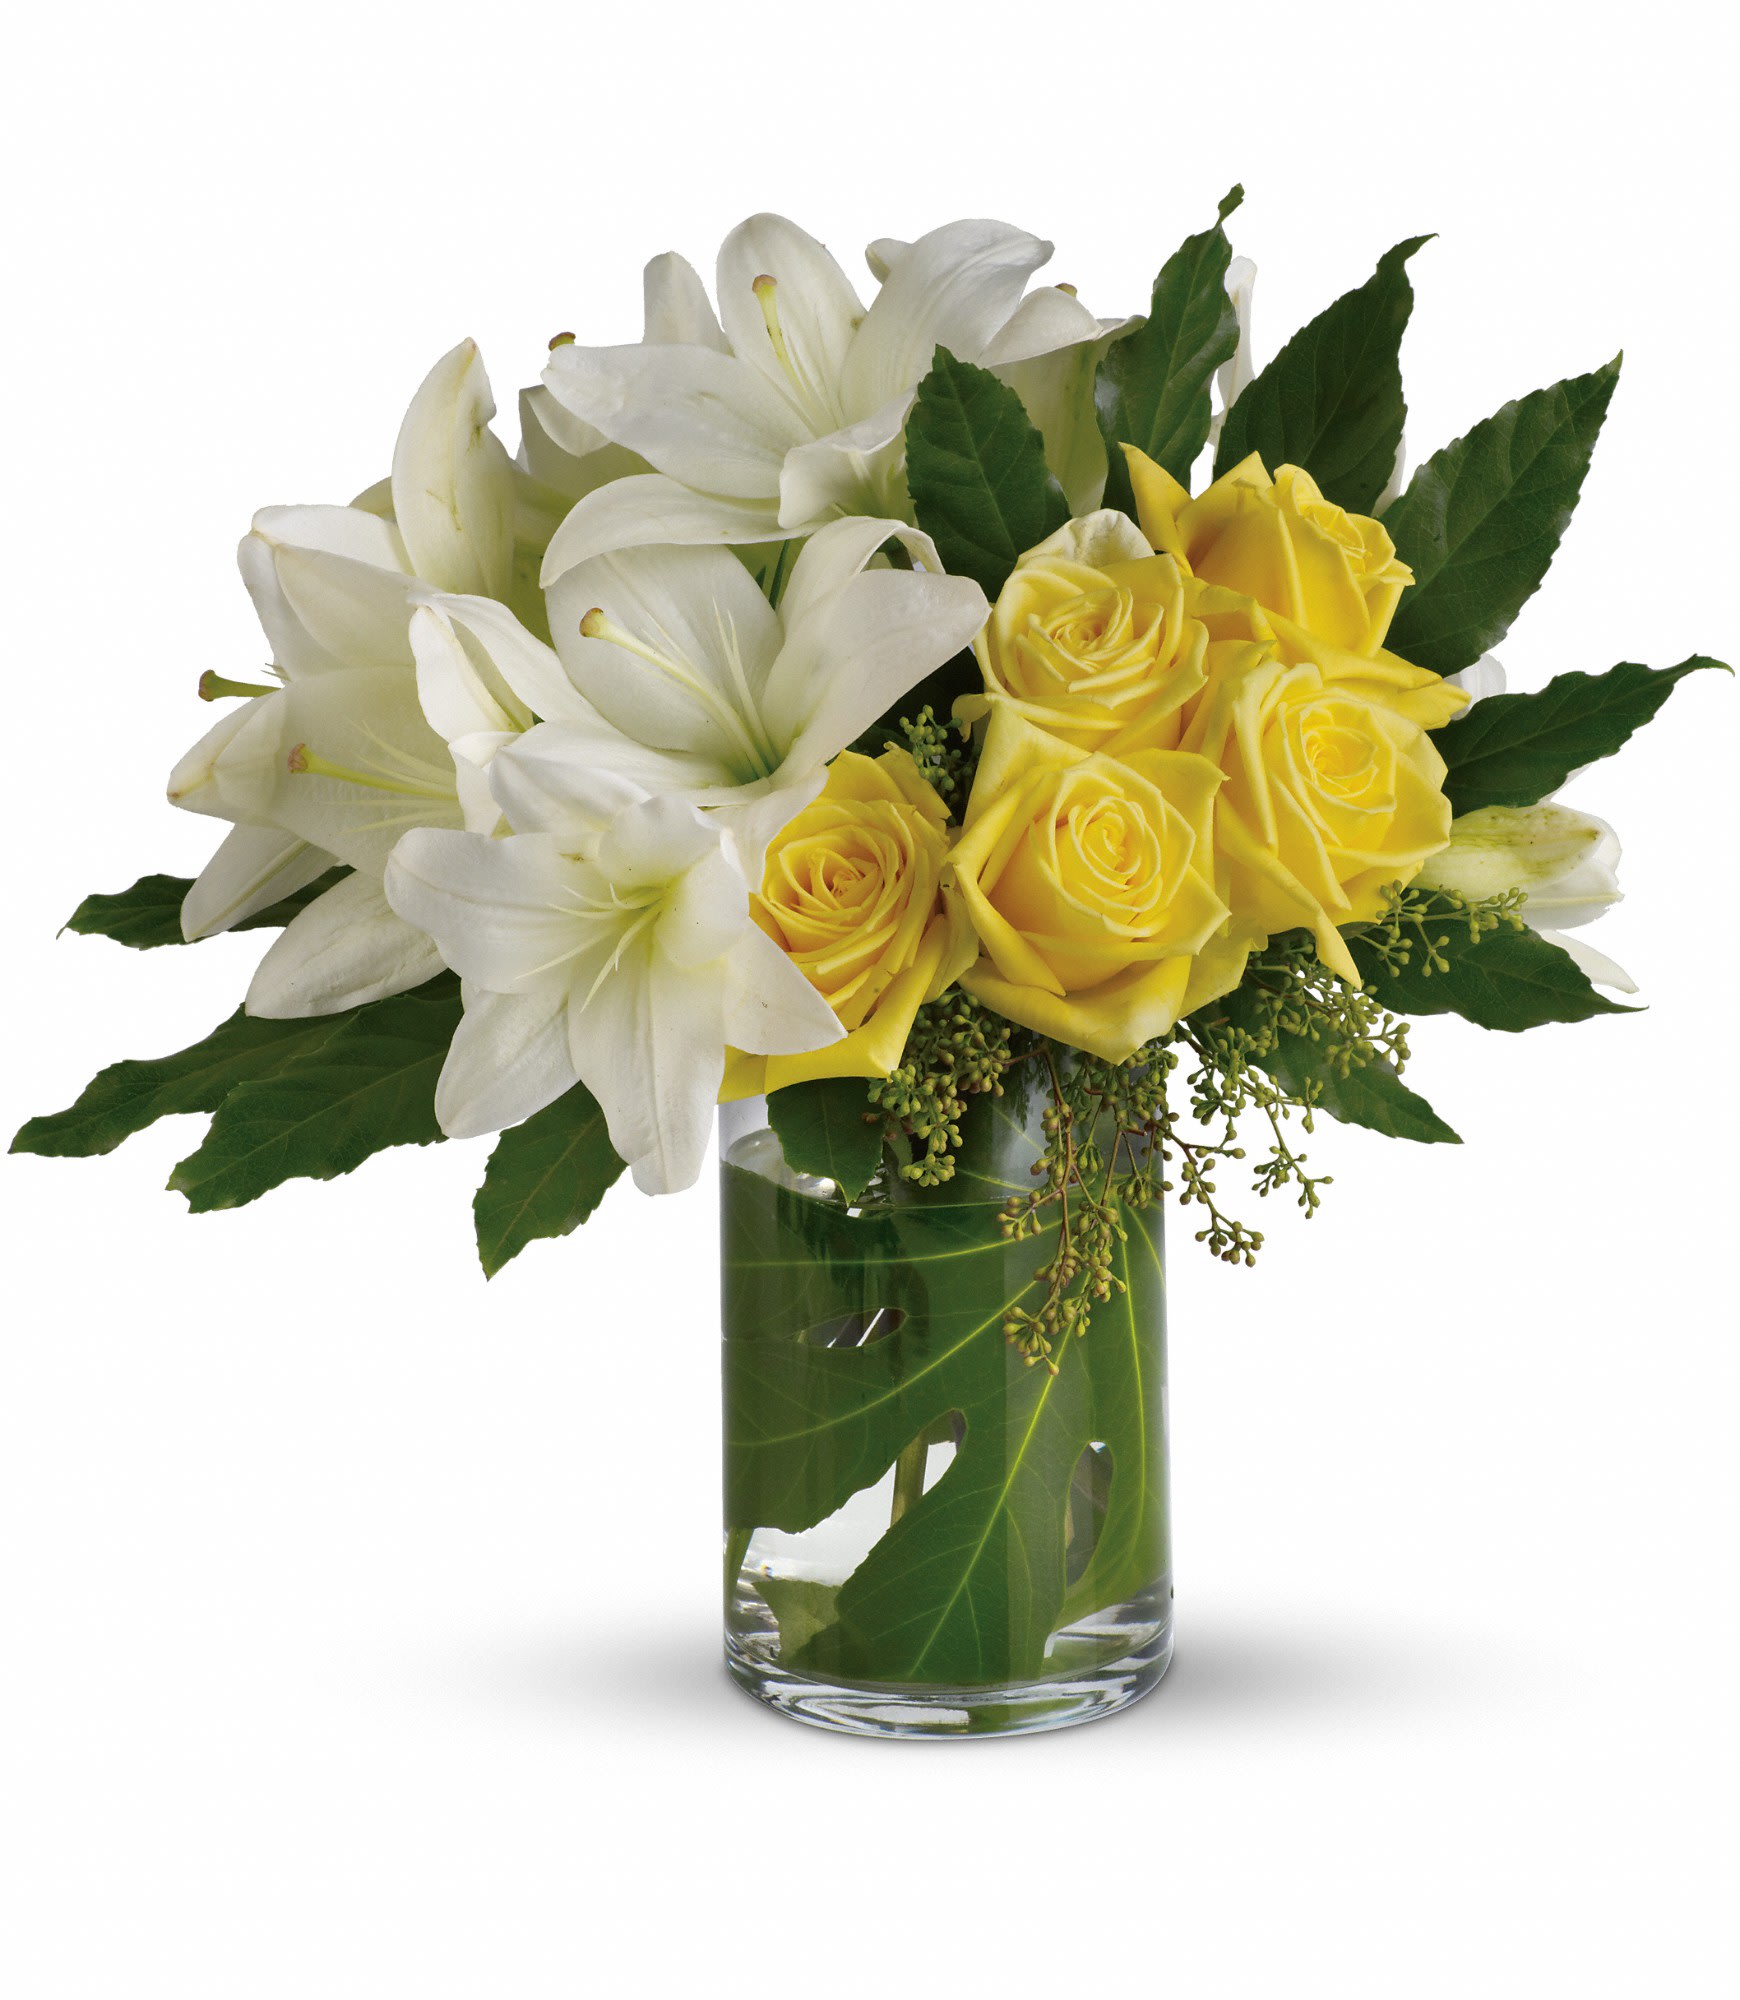 Teleflora's Escape With Me - Invite your special someone on an adventure of love with this fabulously free-form bouquet of lilies and roses in a chic glass cylinder vase. It will inspire you to discover each other all over again - without leaving home. T552-1A